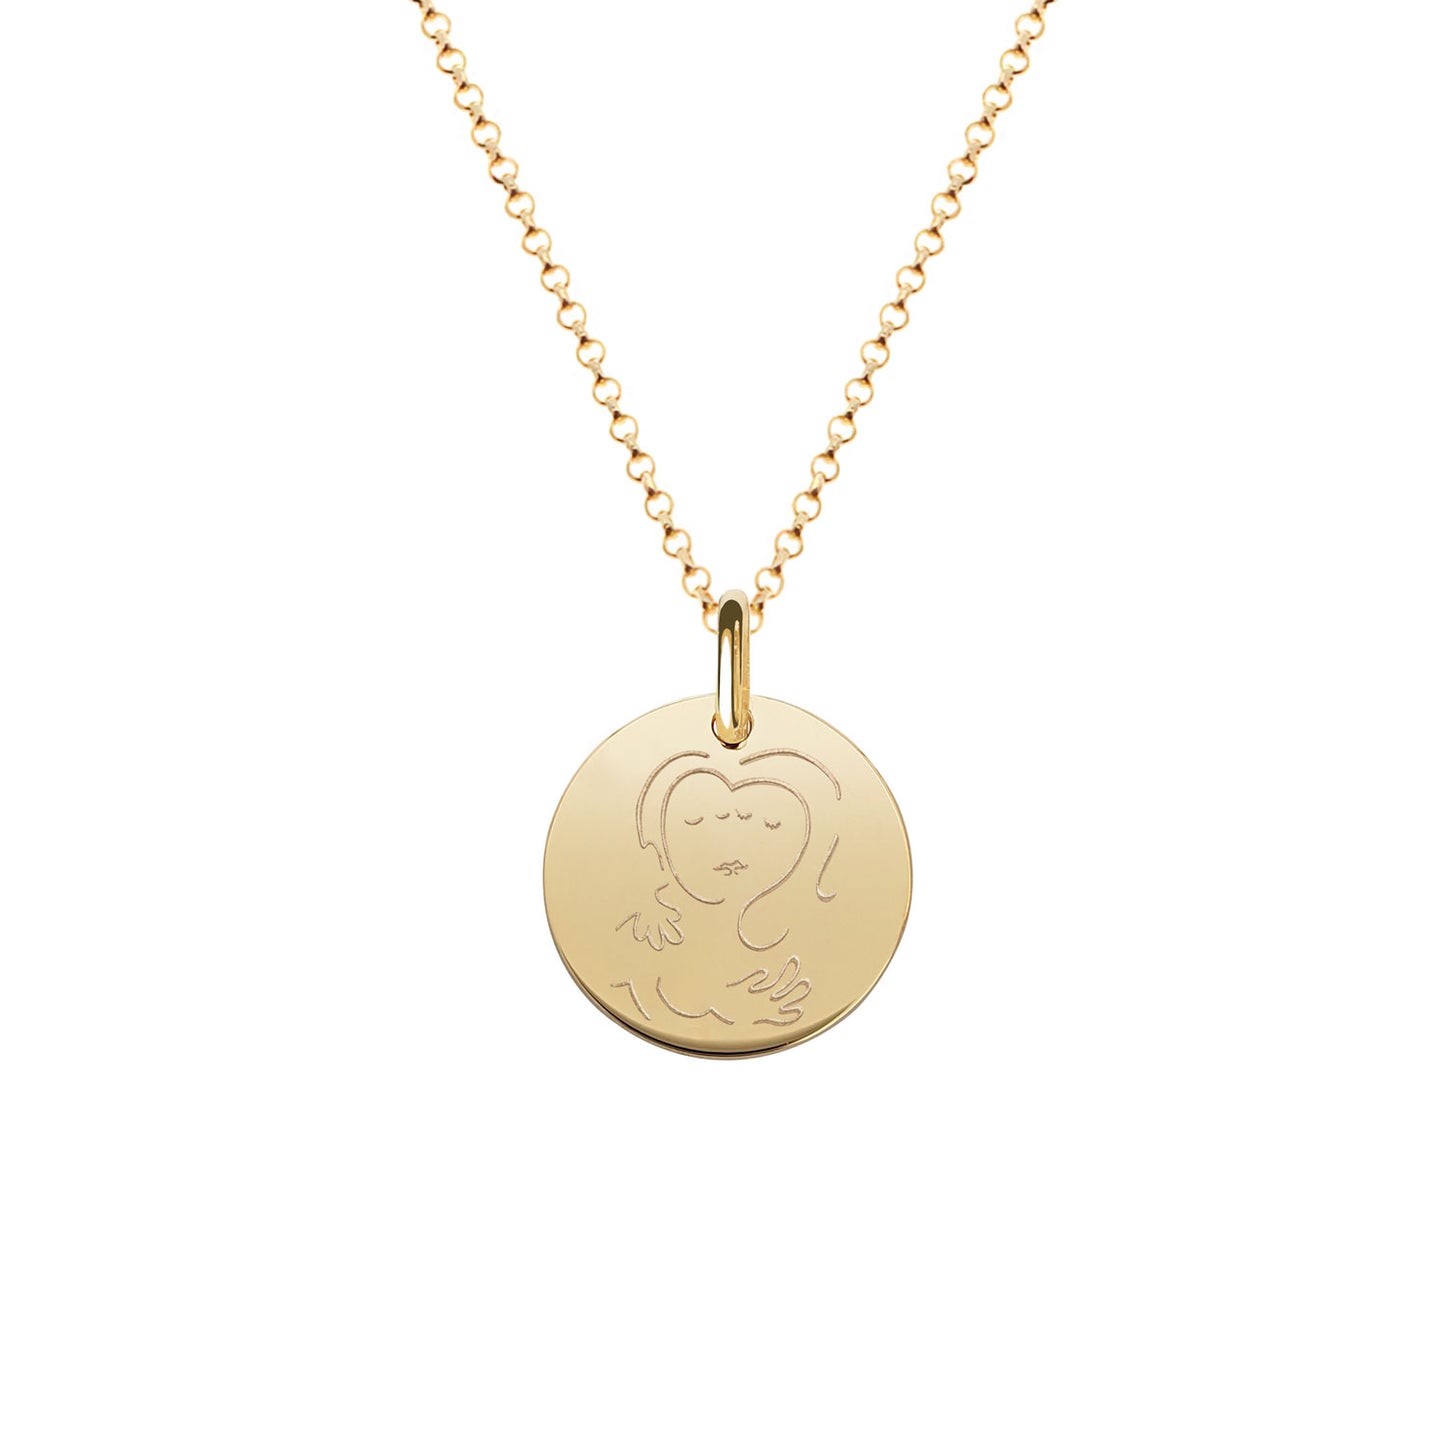 Muze 18k gold vermeil kiss medal necklace, art inspired jewelry, dainty talisman symbol of love, passion, affection. Meaningful sentimental gift perfect for wife or girlfriend.